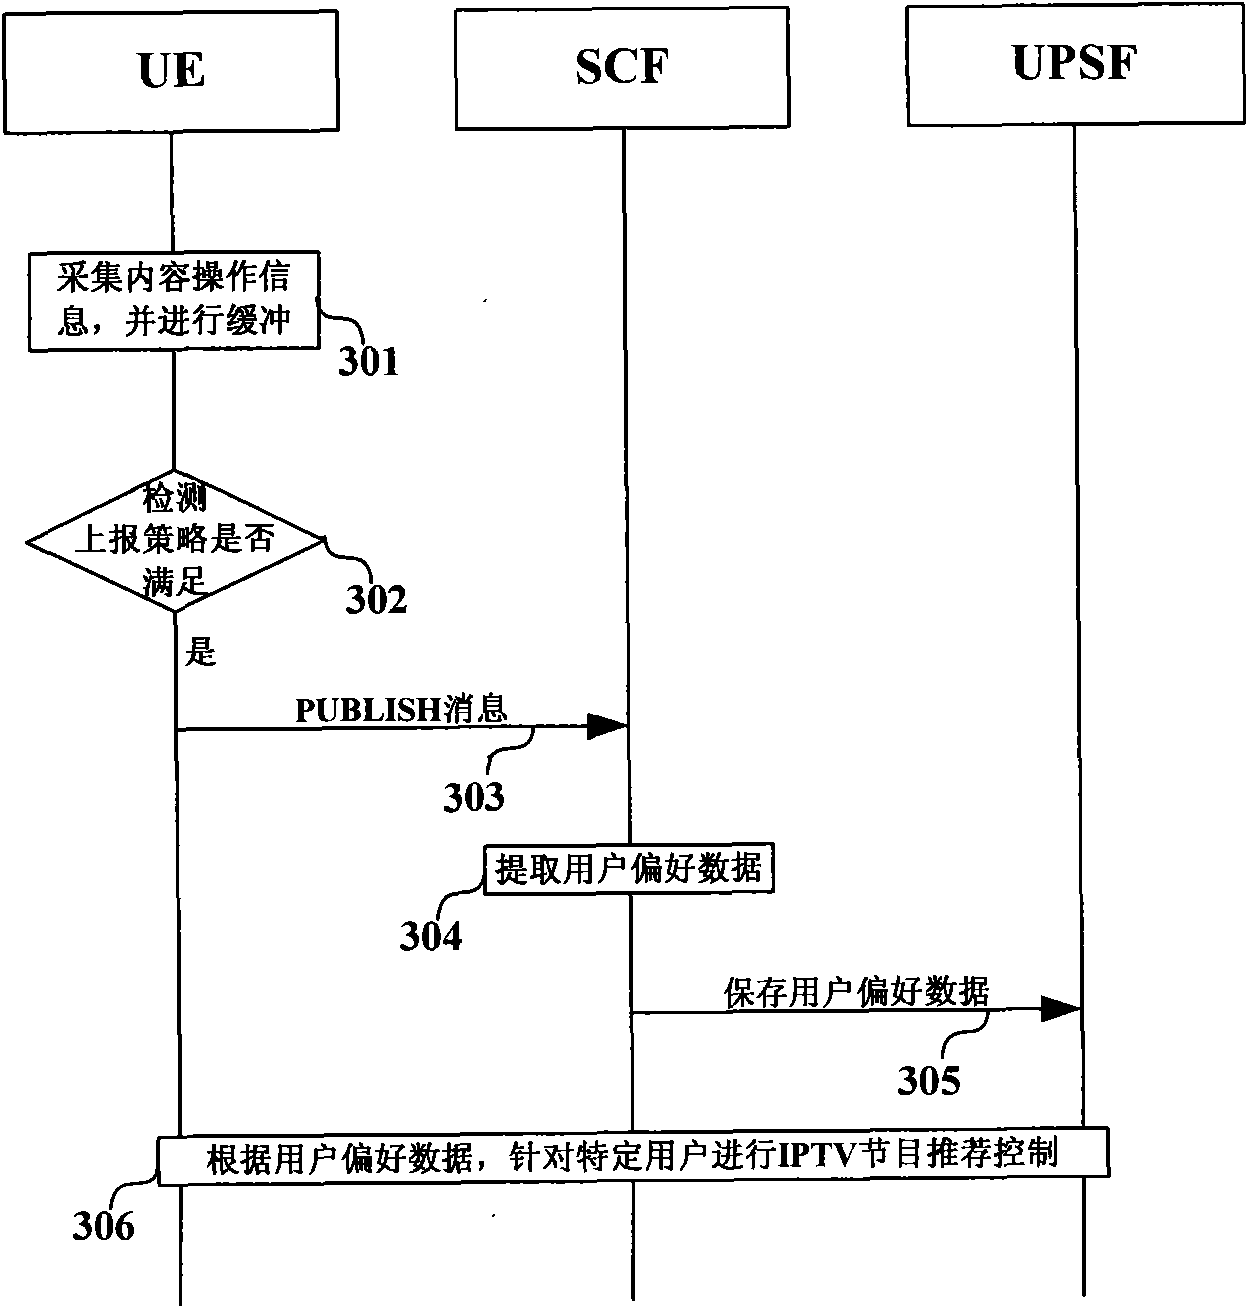 Method and system for reporting information